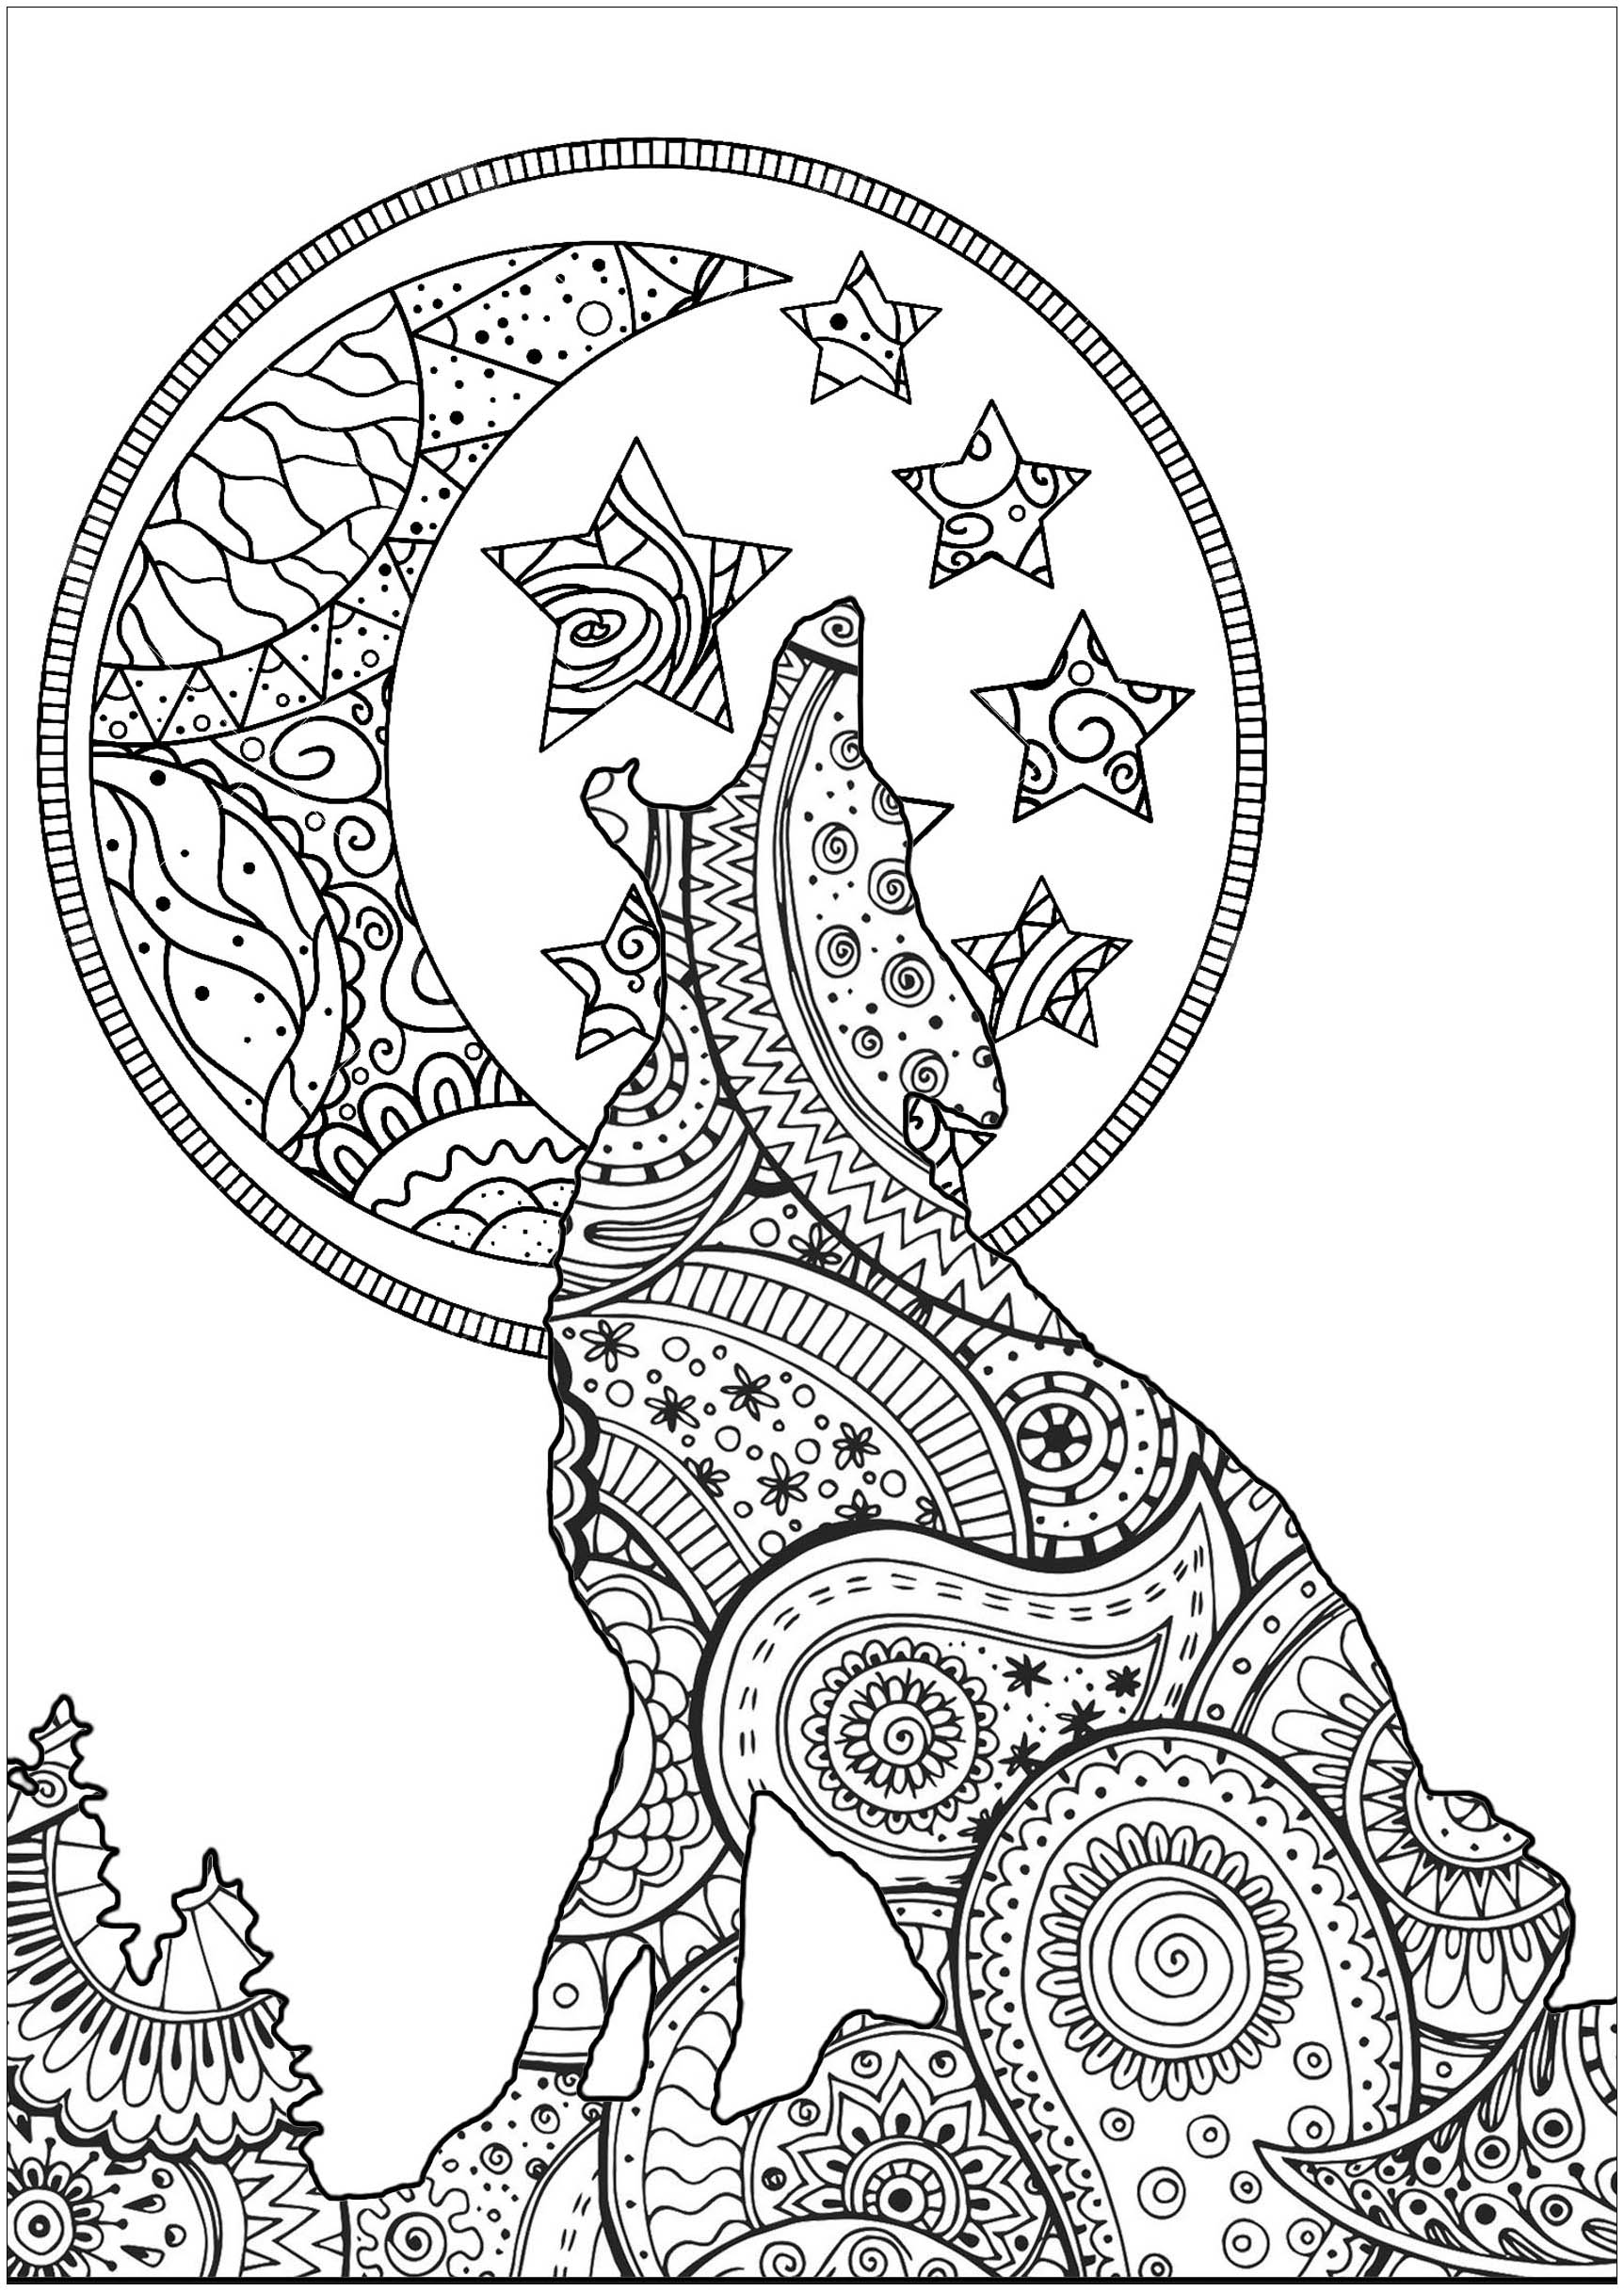 Download Wolf Coloring Pages For Adults / Fall Animal Adult Coloring Pages | Woo! Jr. Kids Activities ...